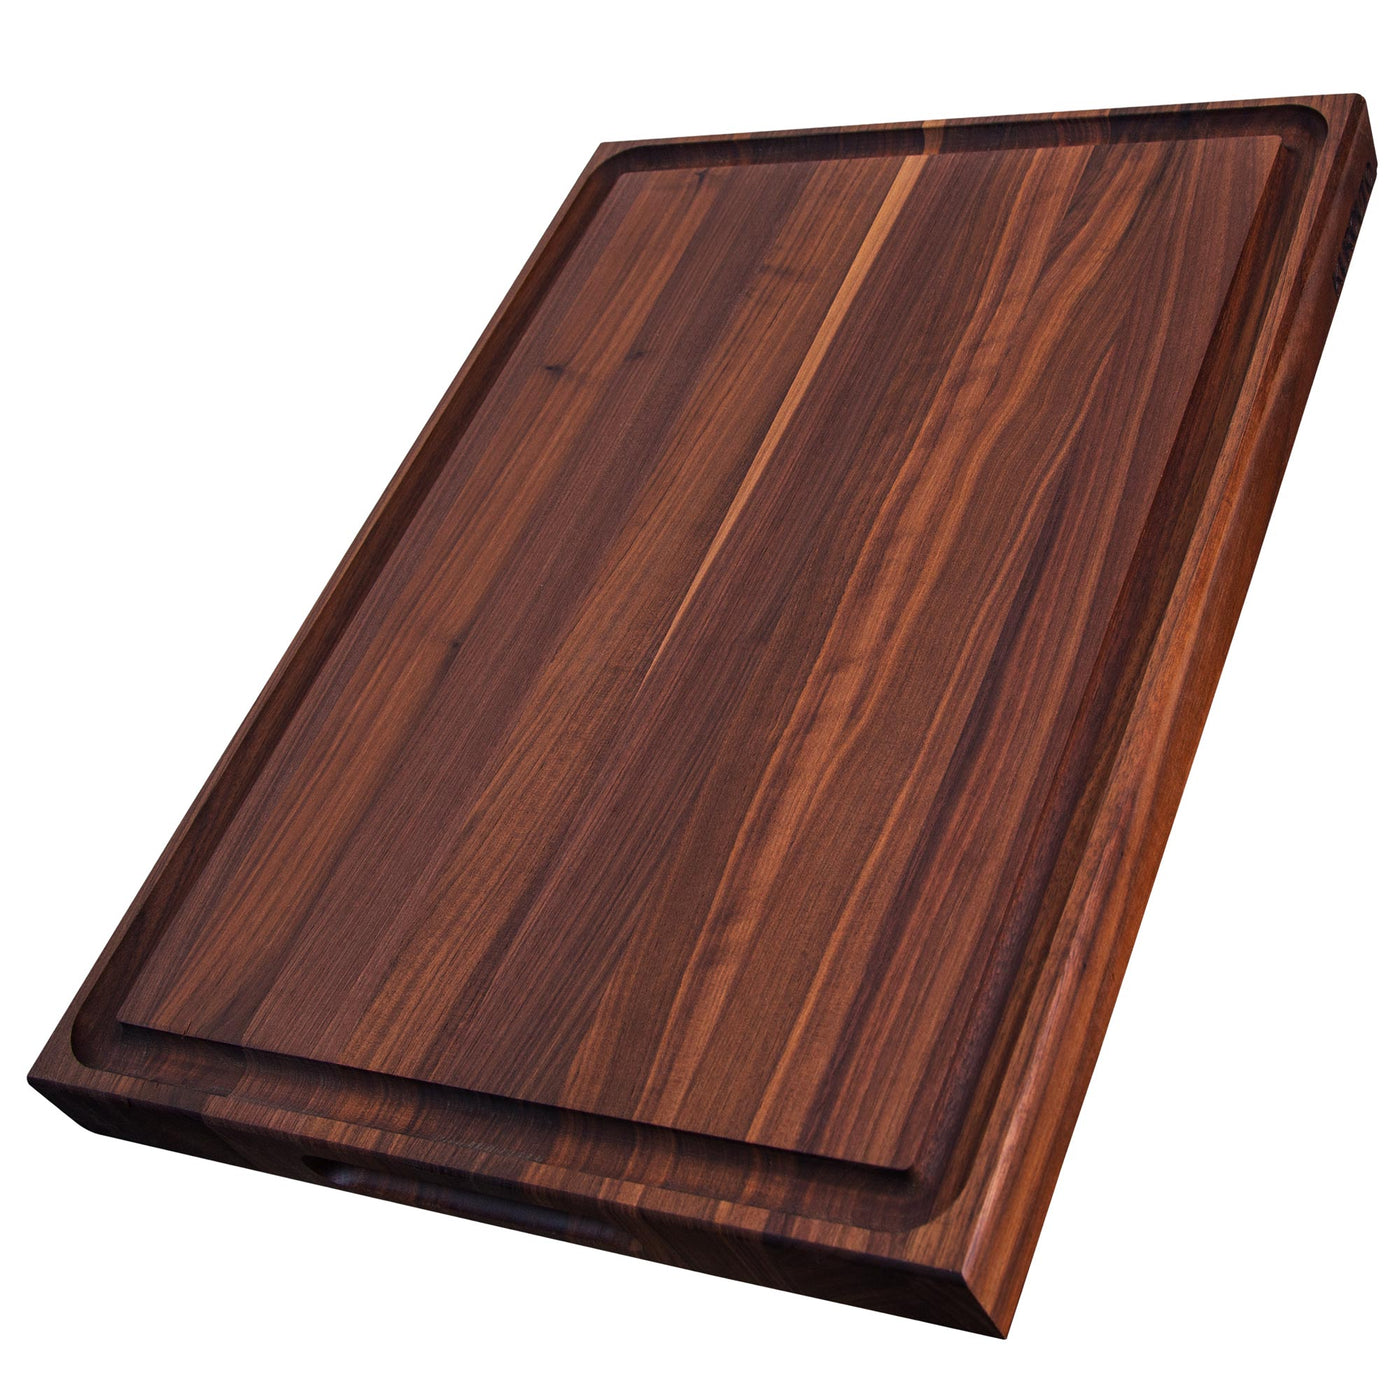 Walnut Edge Grain Butcher Block with Juice Groove and Integrated Handles (20 x 15 x 1.5 Inches)